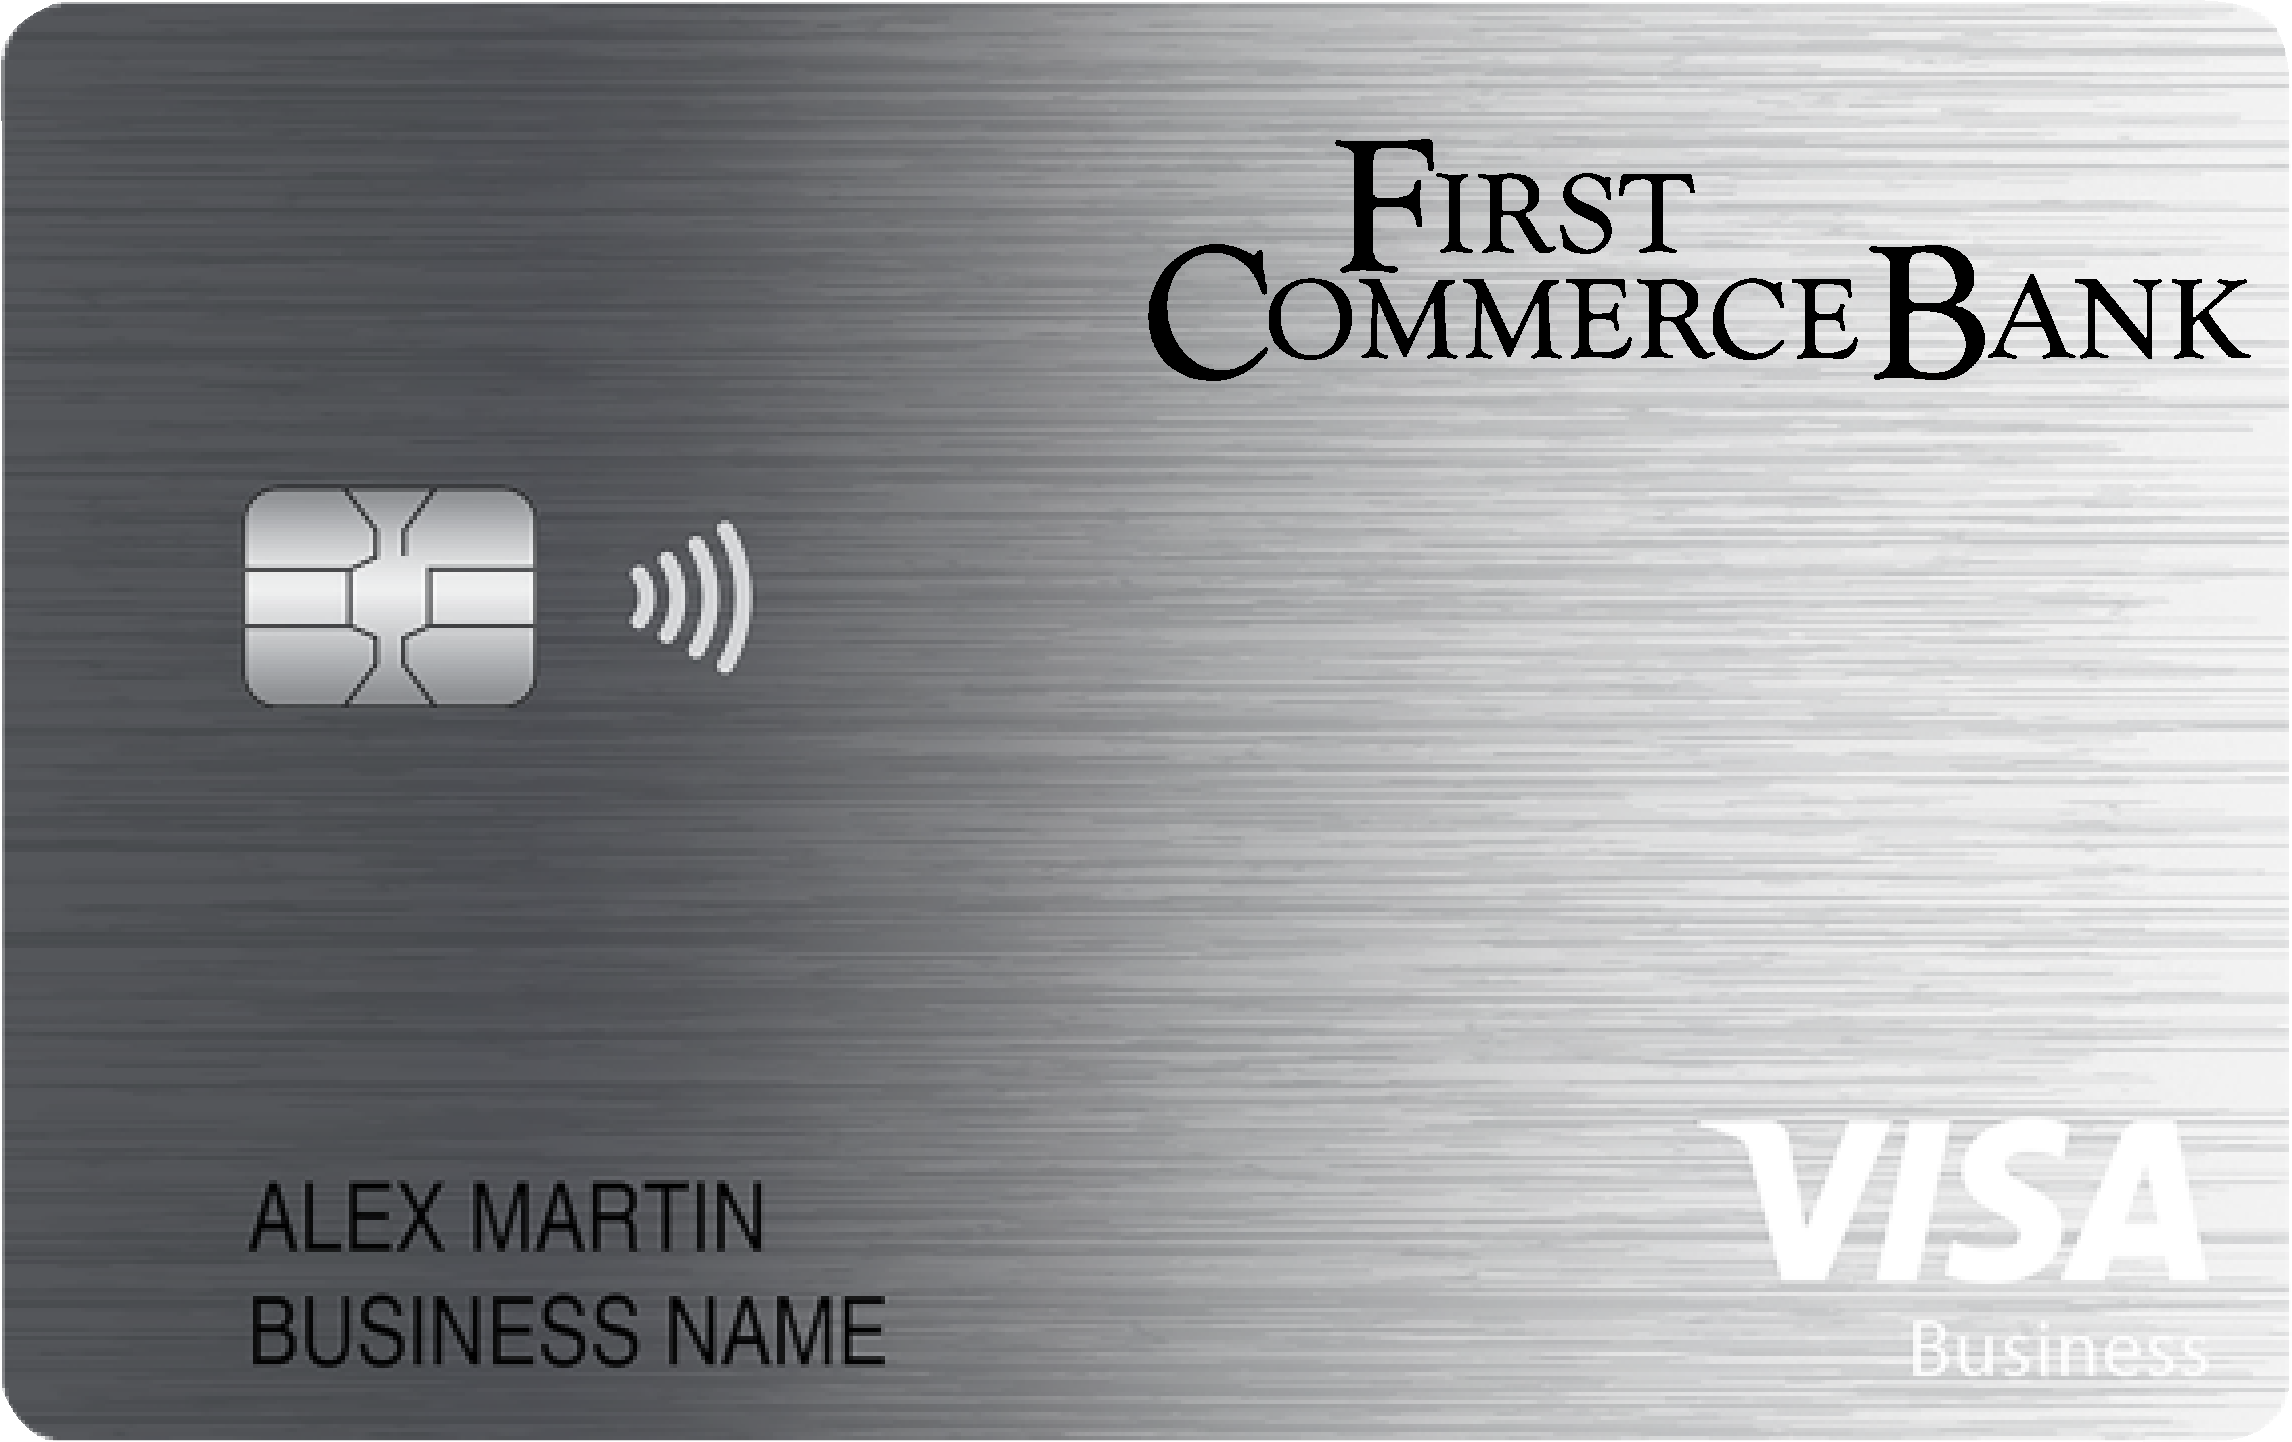 First Commerce Bank Business Cash Preferred